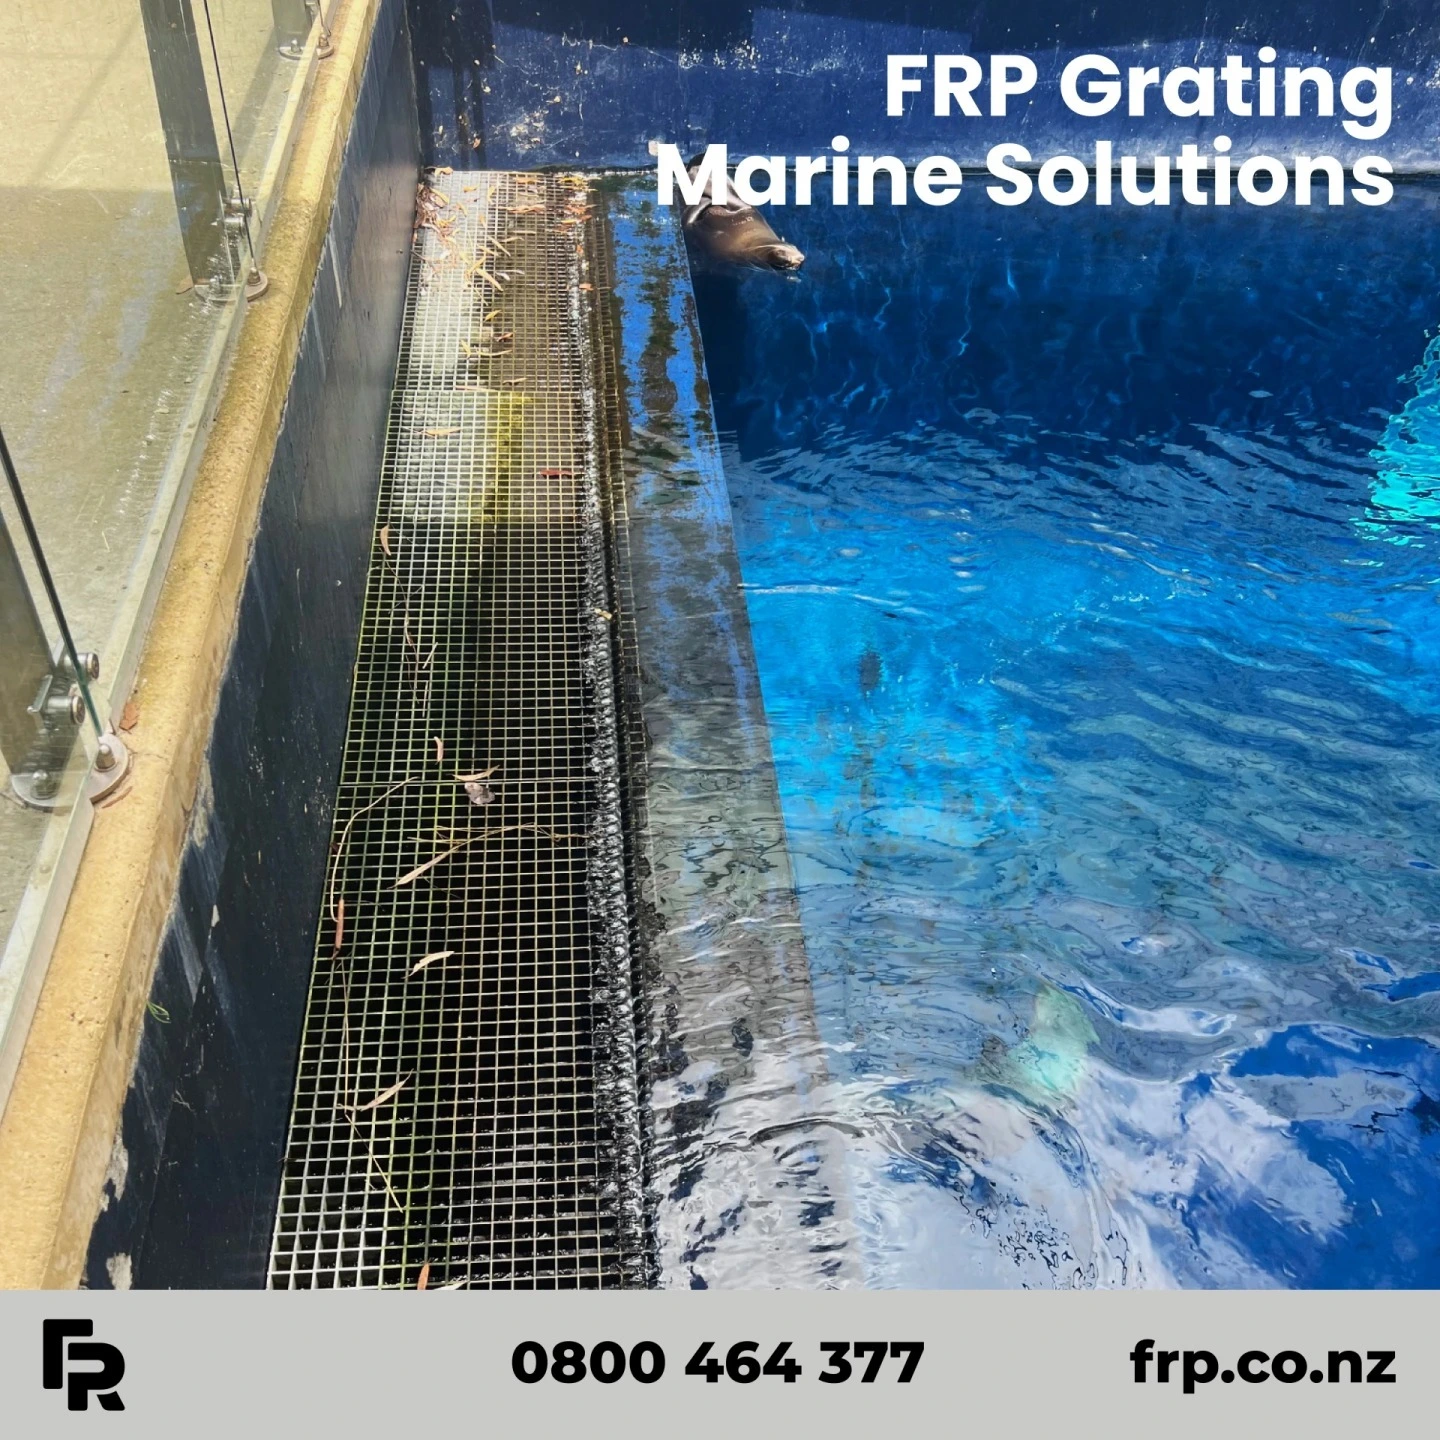 FRP non-slip grating is great in marine areas. It's durable and long-lasting, resistant to corrosion and won't leach harmful chemicals into the water. Enquire today!

#frp #frpgrating #marina #marine #commercial #nzarchitects #marinenz #zoos